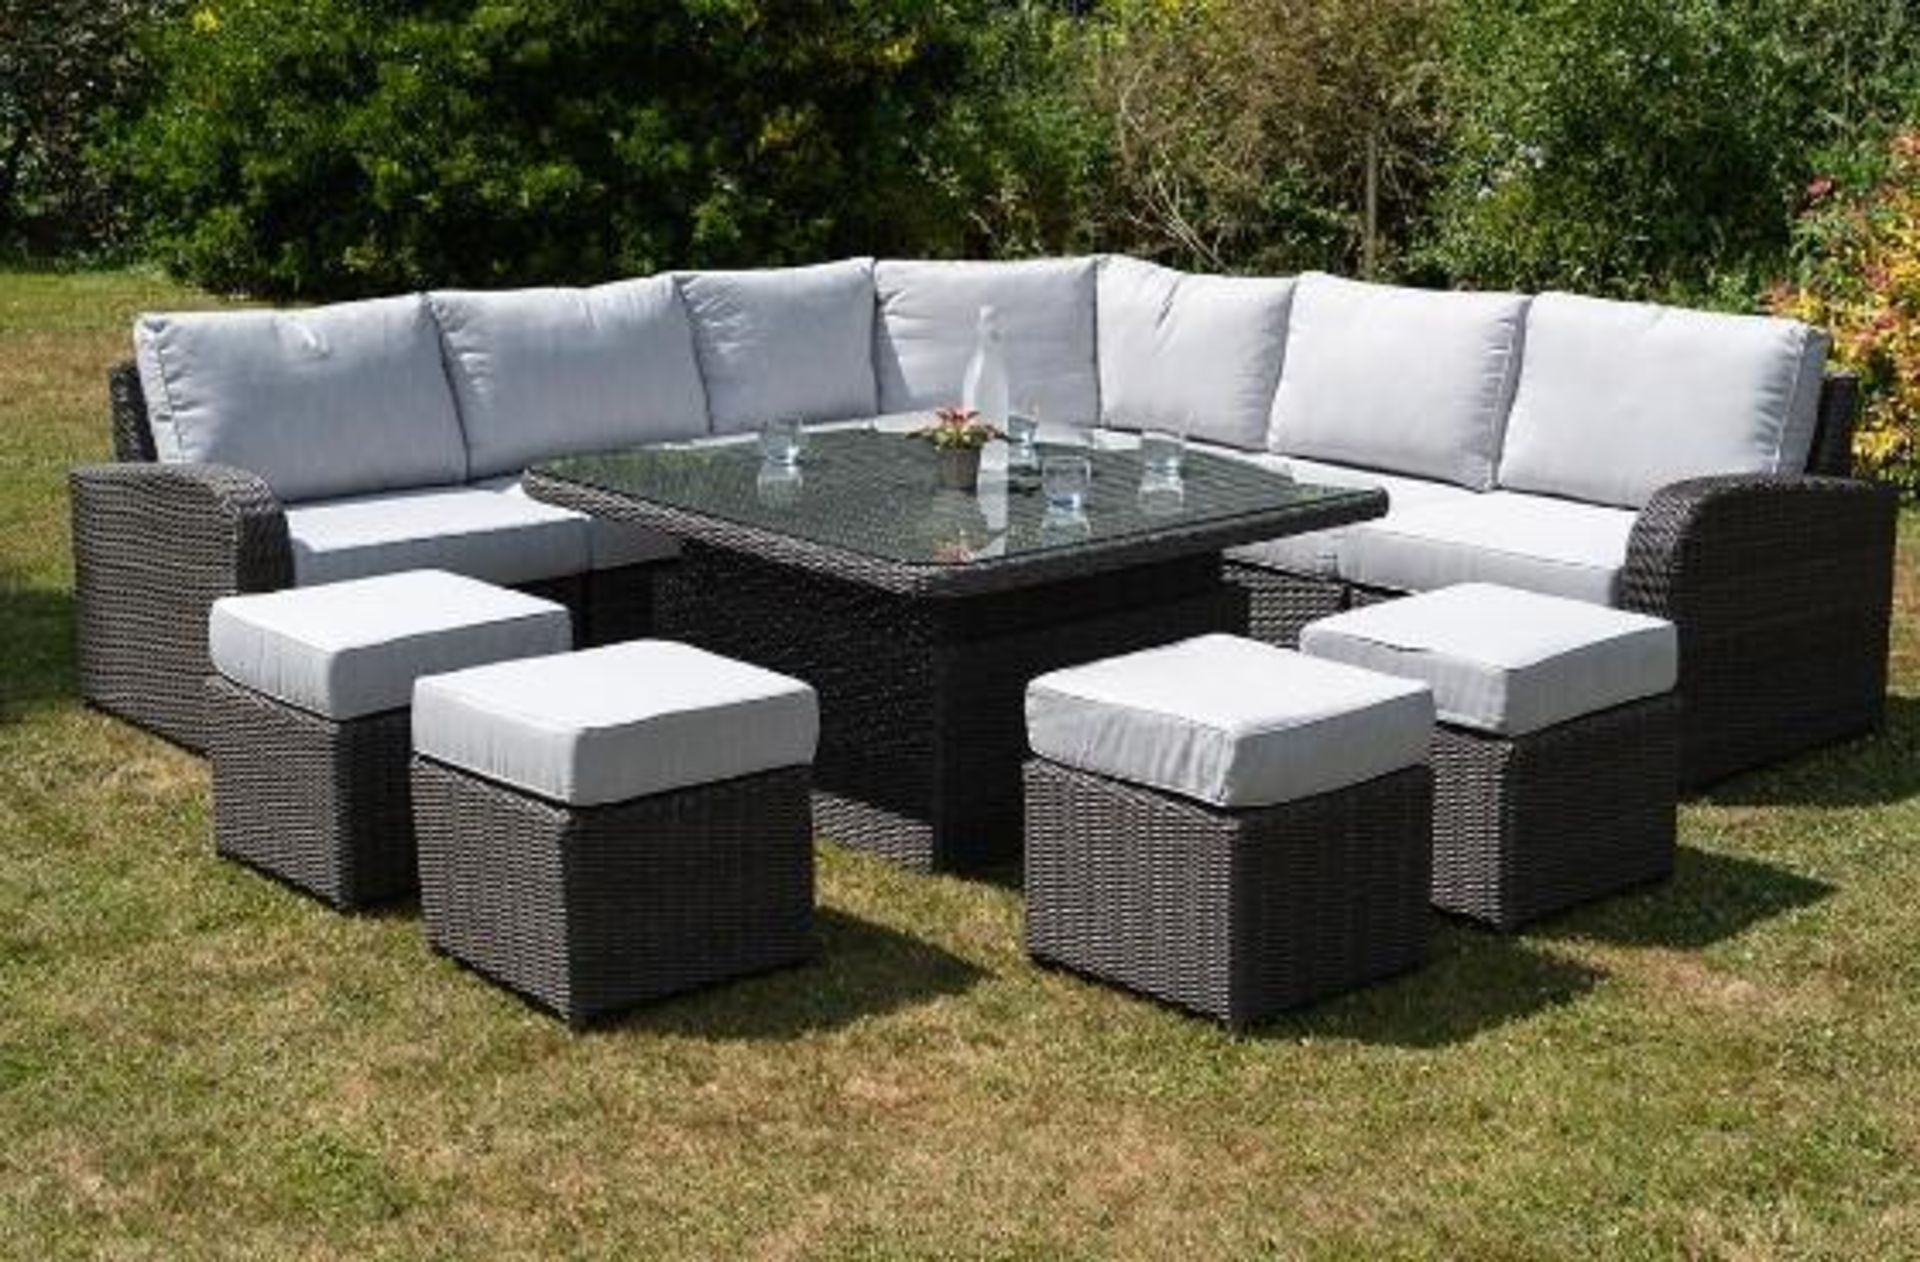 Brand New Moda Furniture, 10 Seater Outdoor Rise and Fall Table Dining Set in Natural with Cream - Image 3 of 6